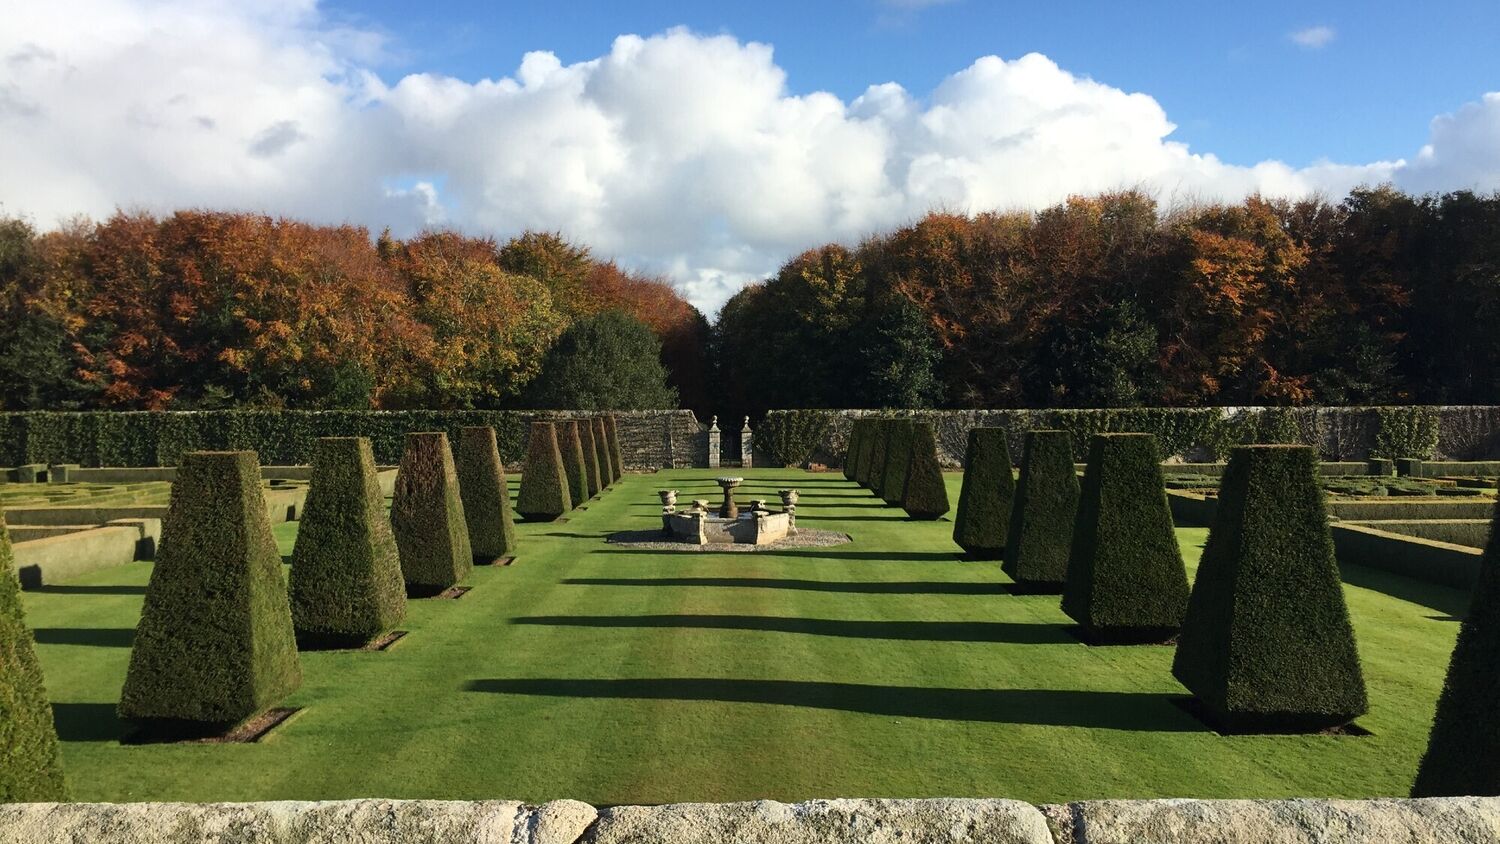 Two rows of topiary yew obelisks form an avenue in a formal garden.